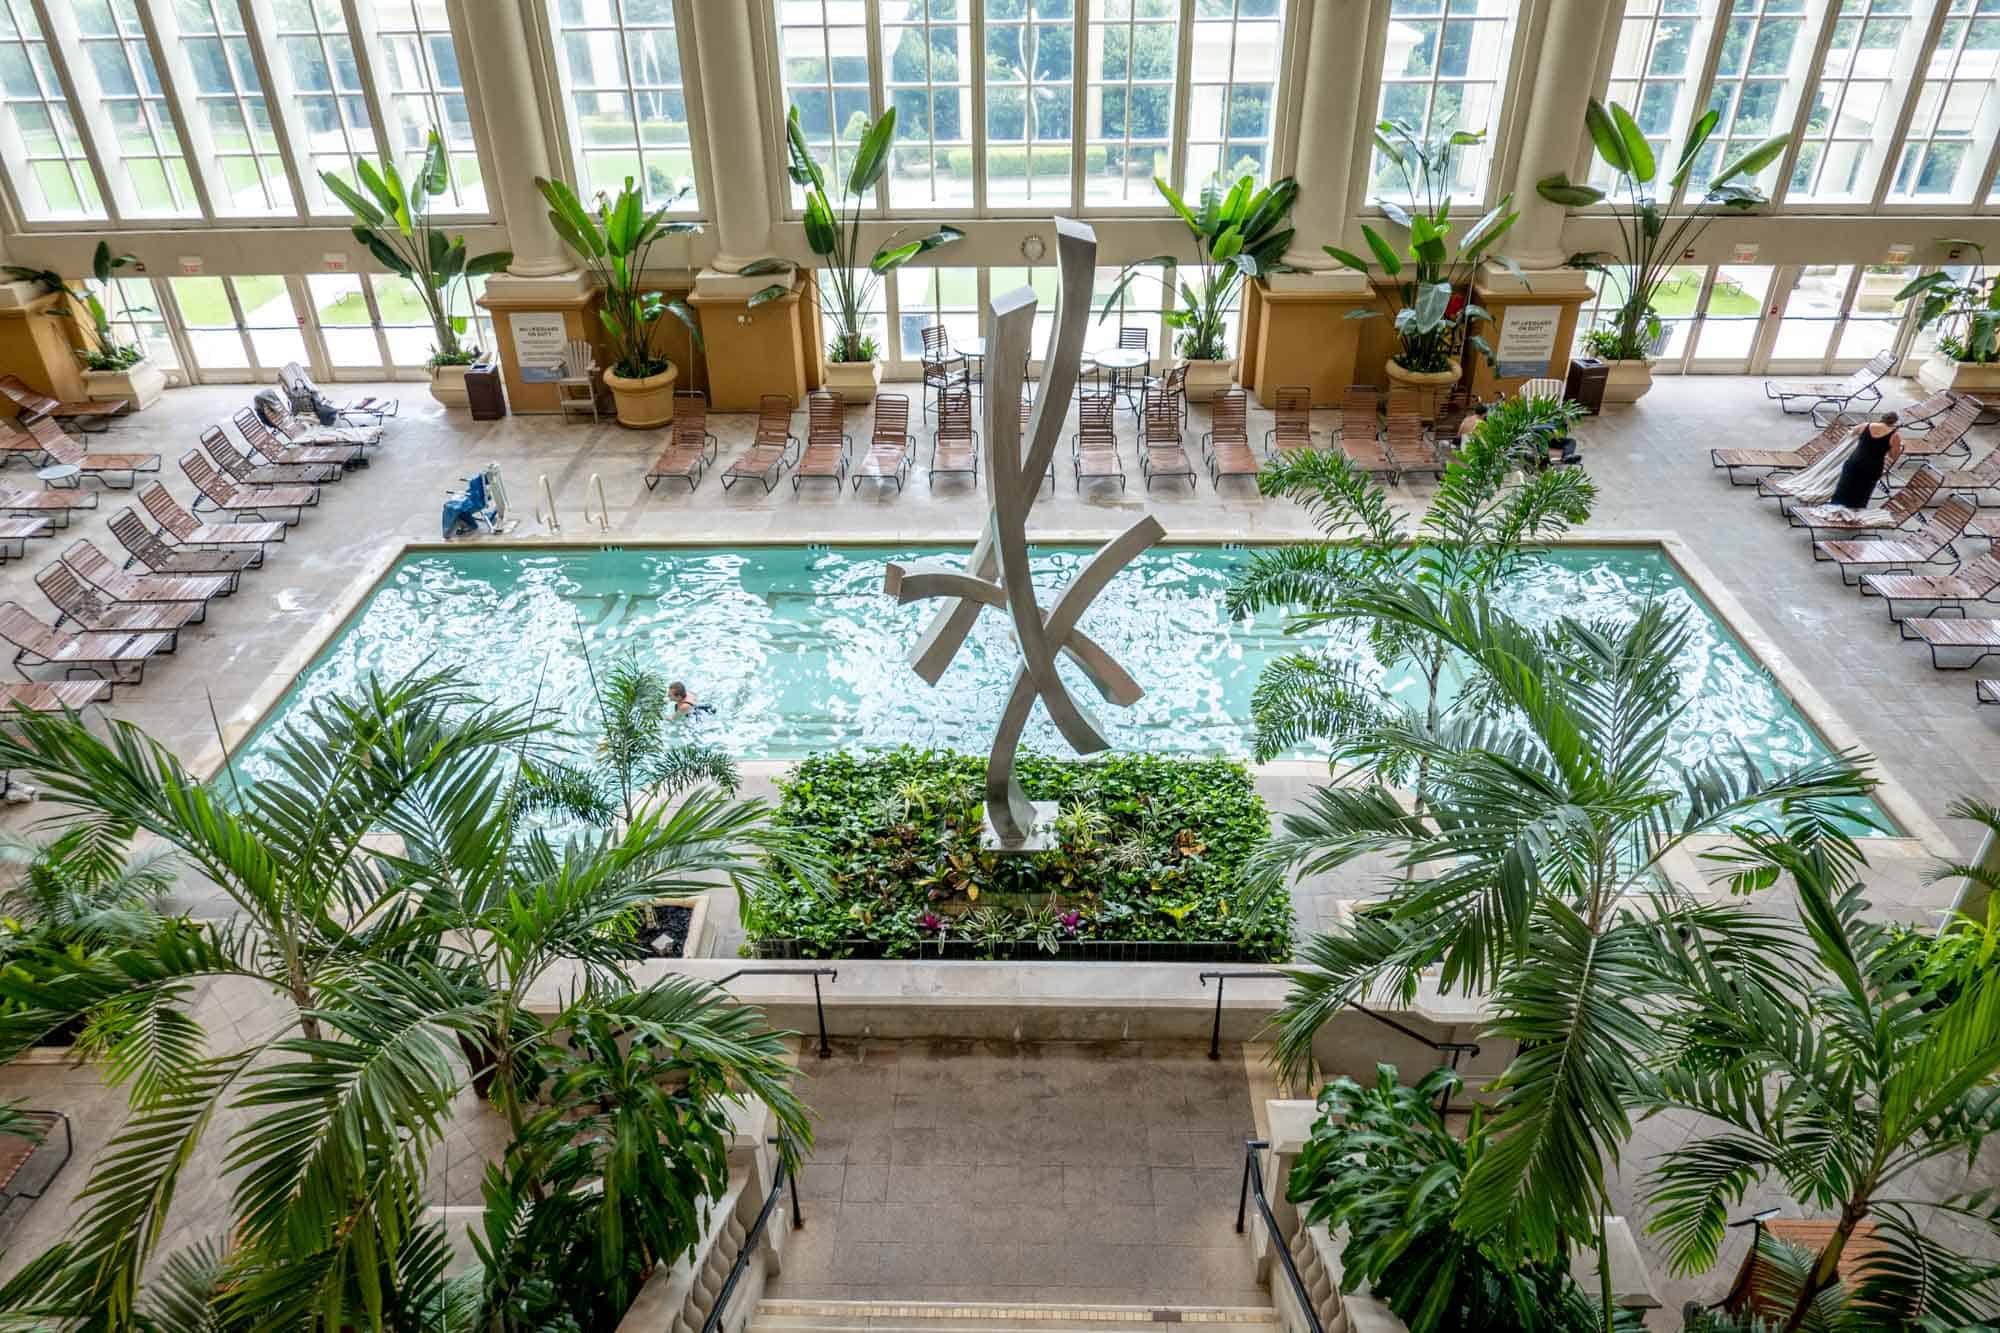 Indoor pool surrounded by plants and sun chairs